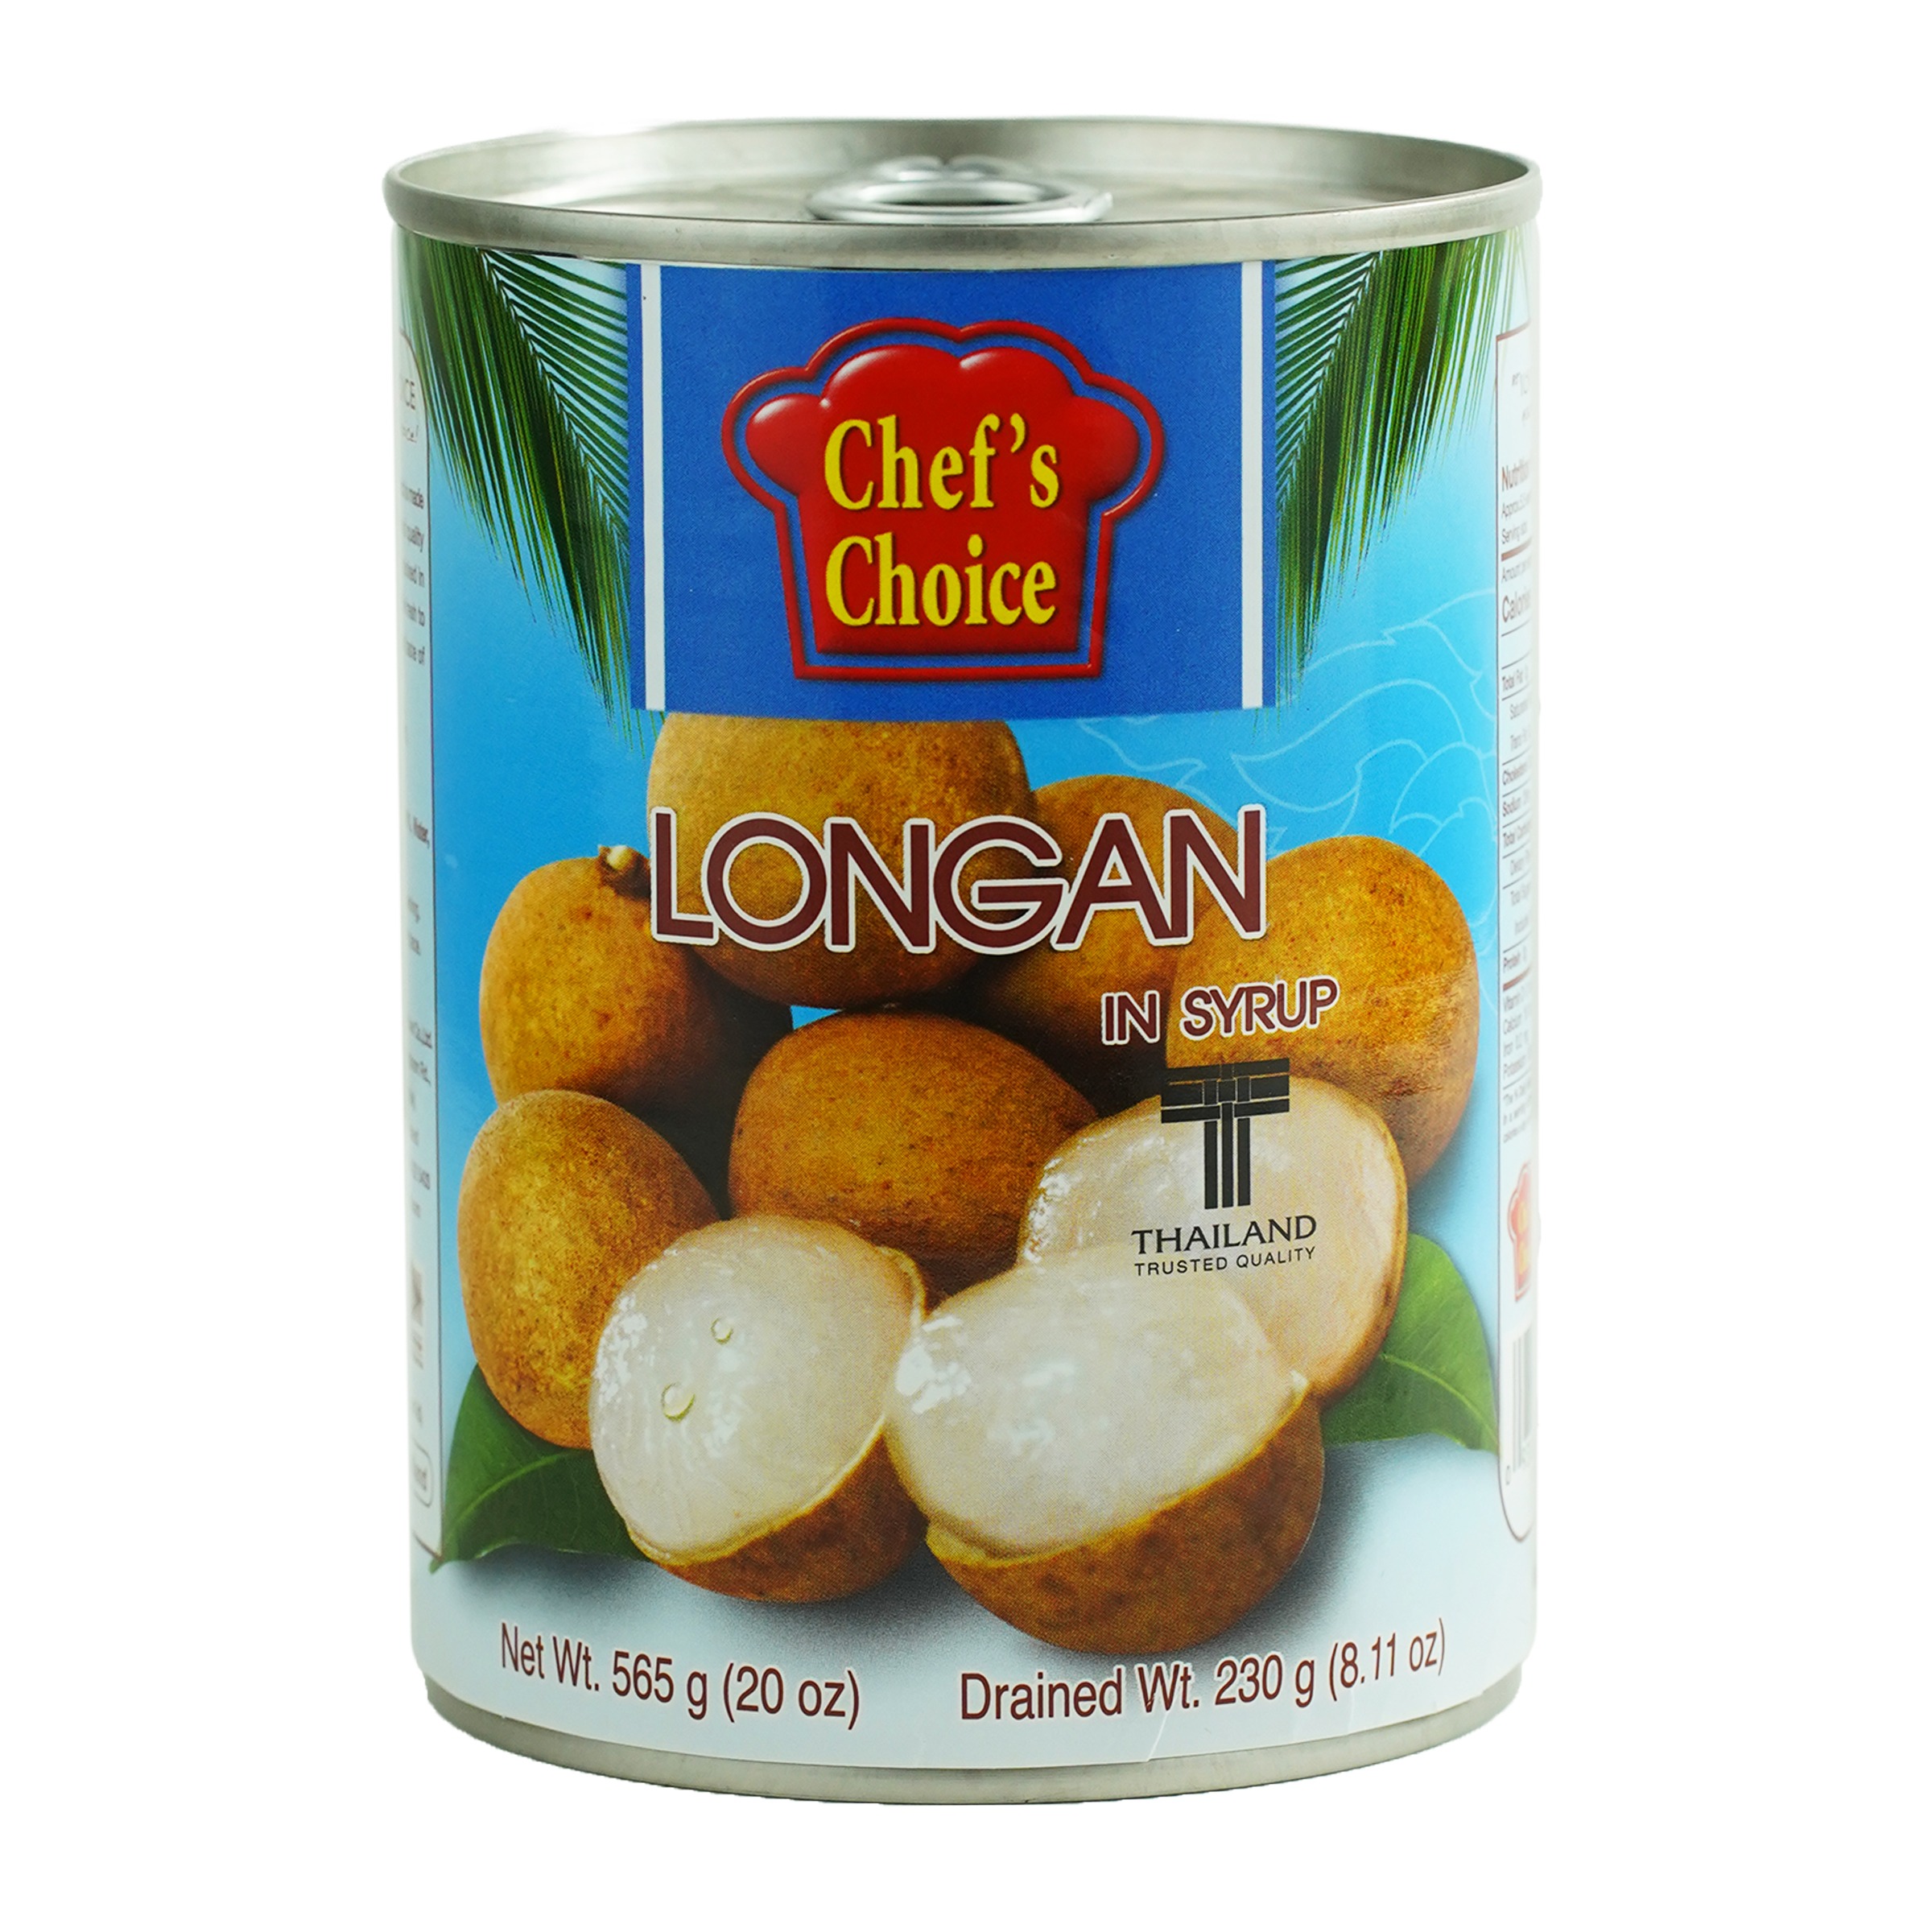 Chef's Choice Longan in Syrup, 20 oz (24-Count) - VIFON